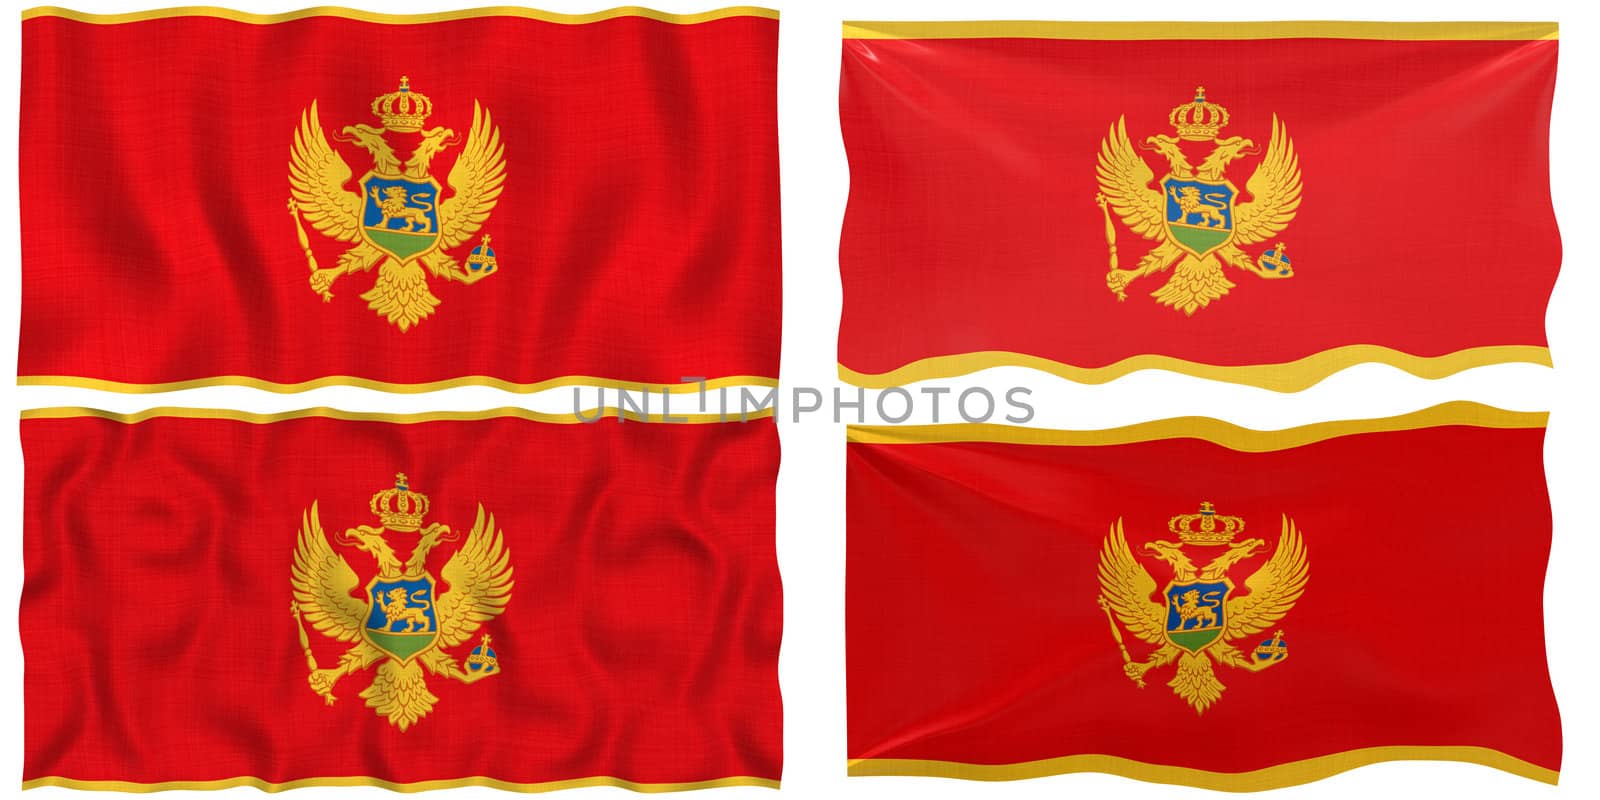 Flag of Montenegro by clearviewstock